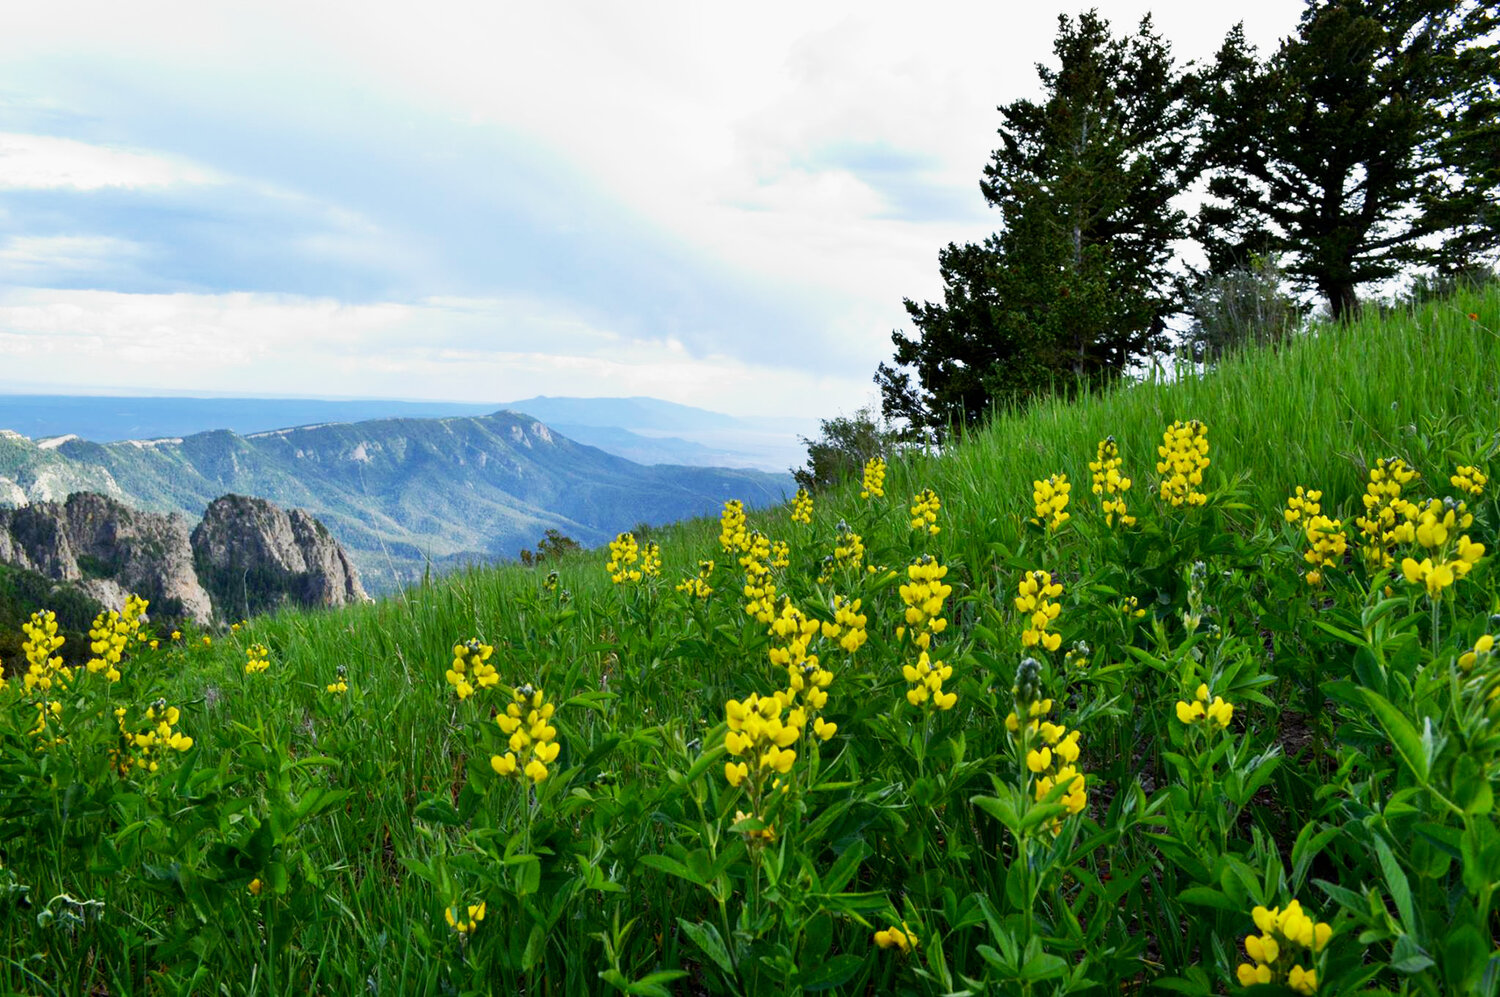 Wild flowers can be found along the Crest Trail that stretches for more than 26 miles from Tijeras to Placitas.